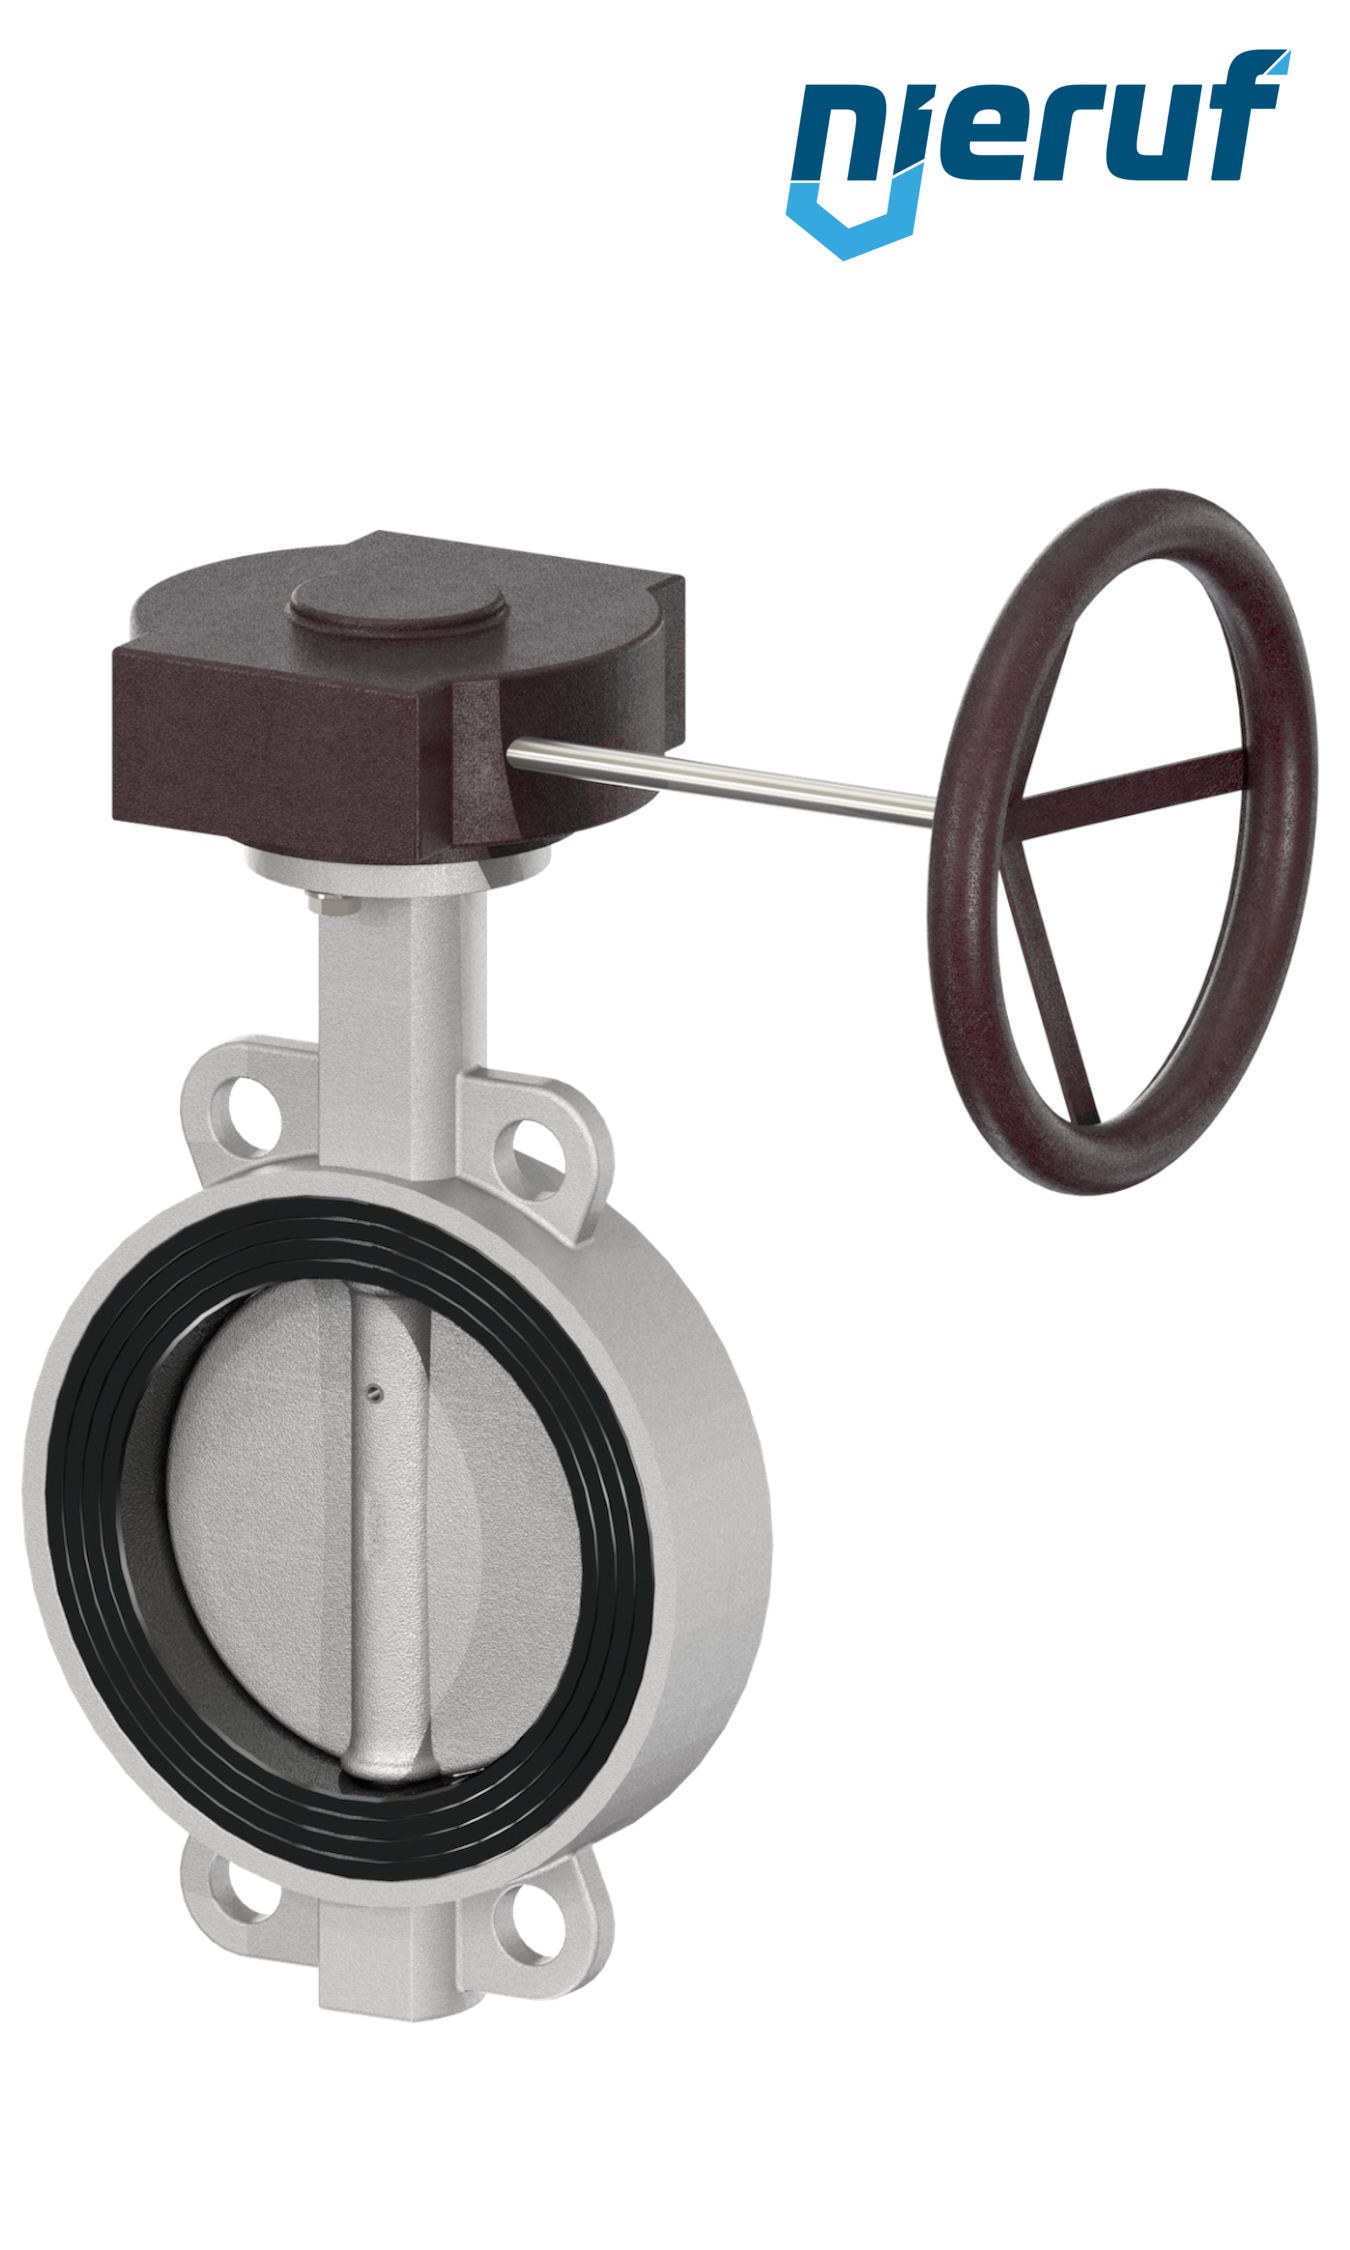 Butterfly-valve-stainless-steel DN300 PN16 AK08 EPDM gearbox